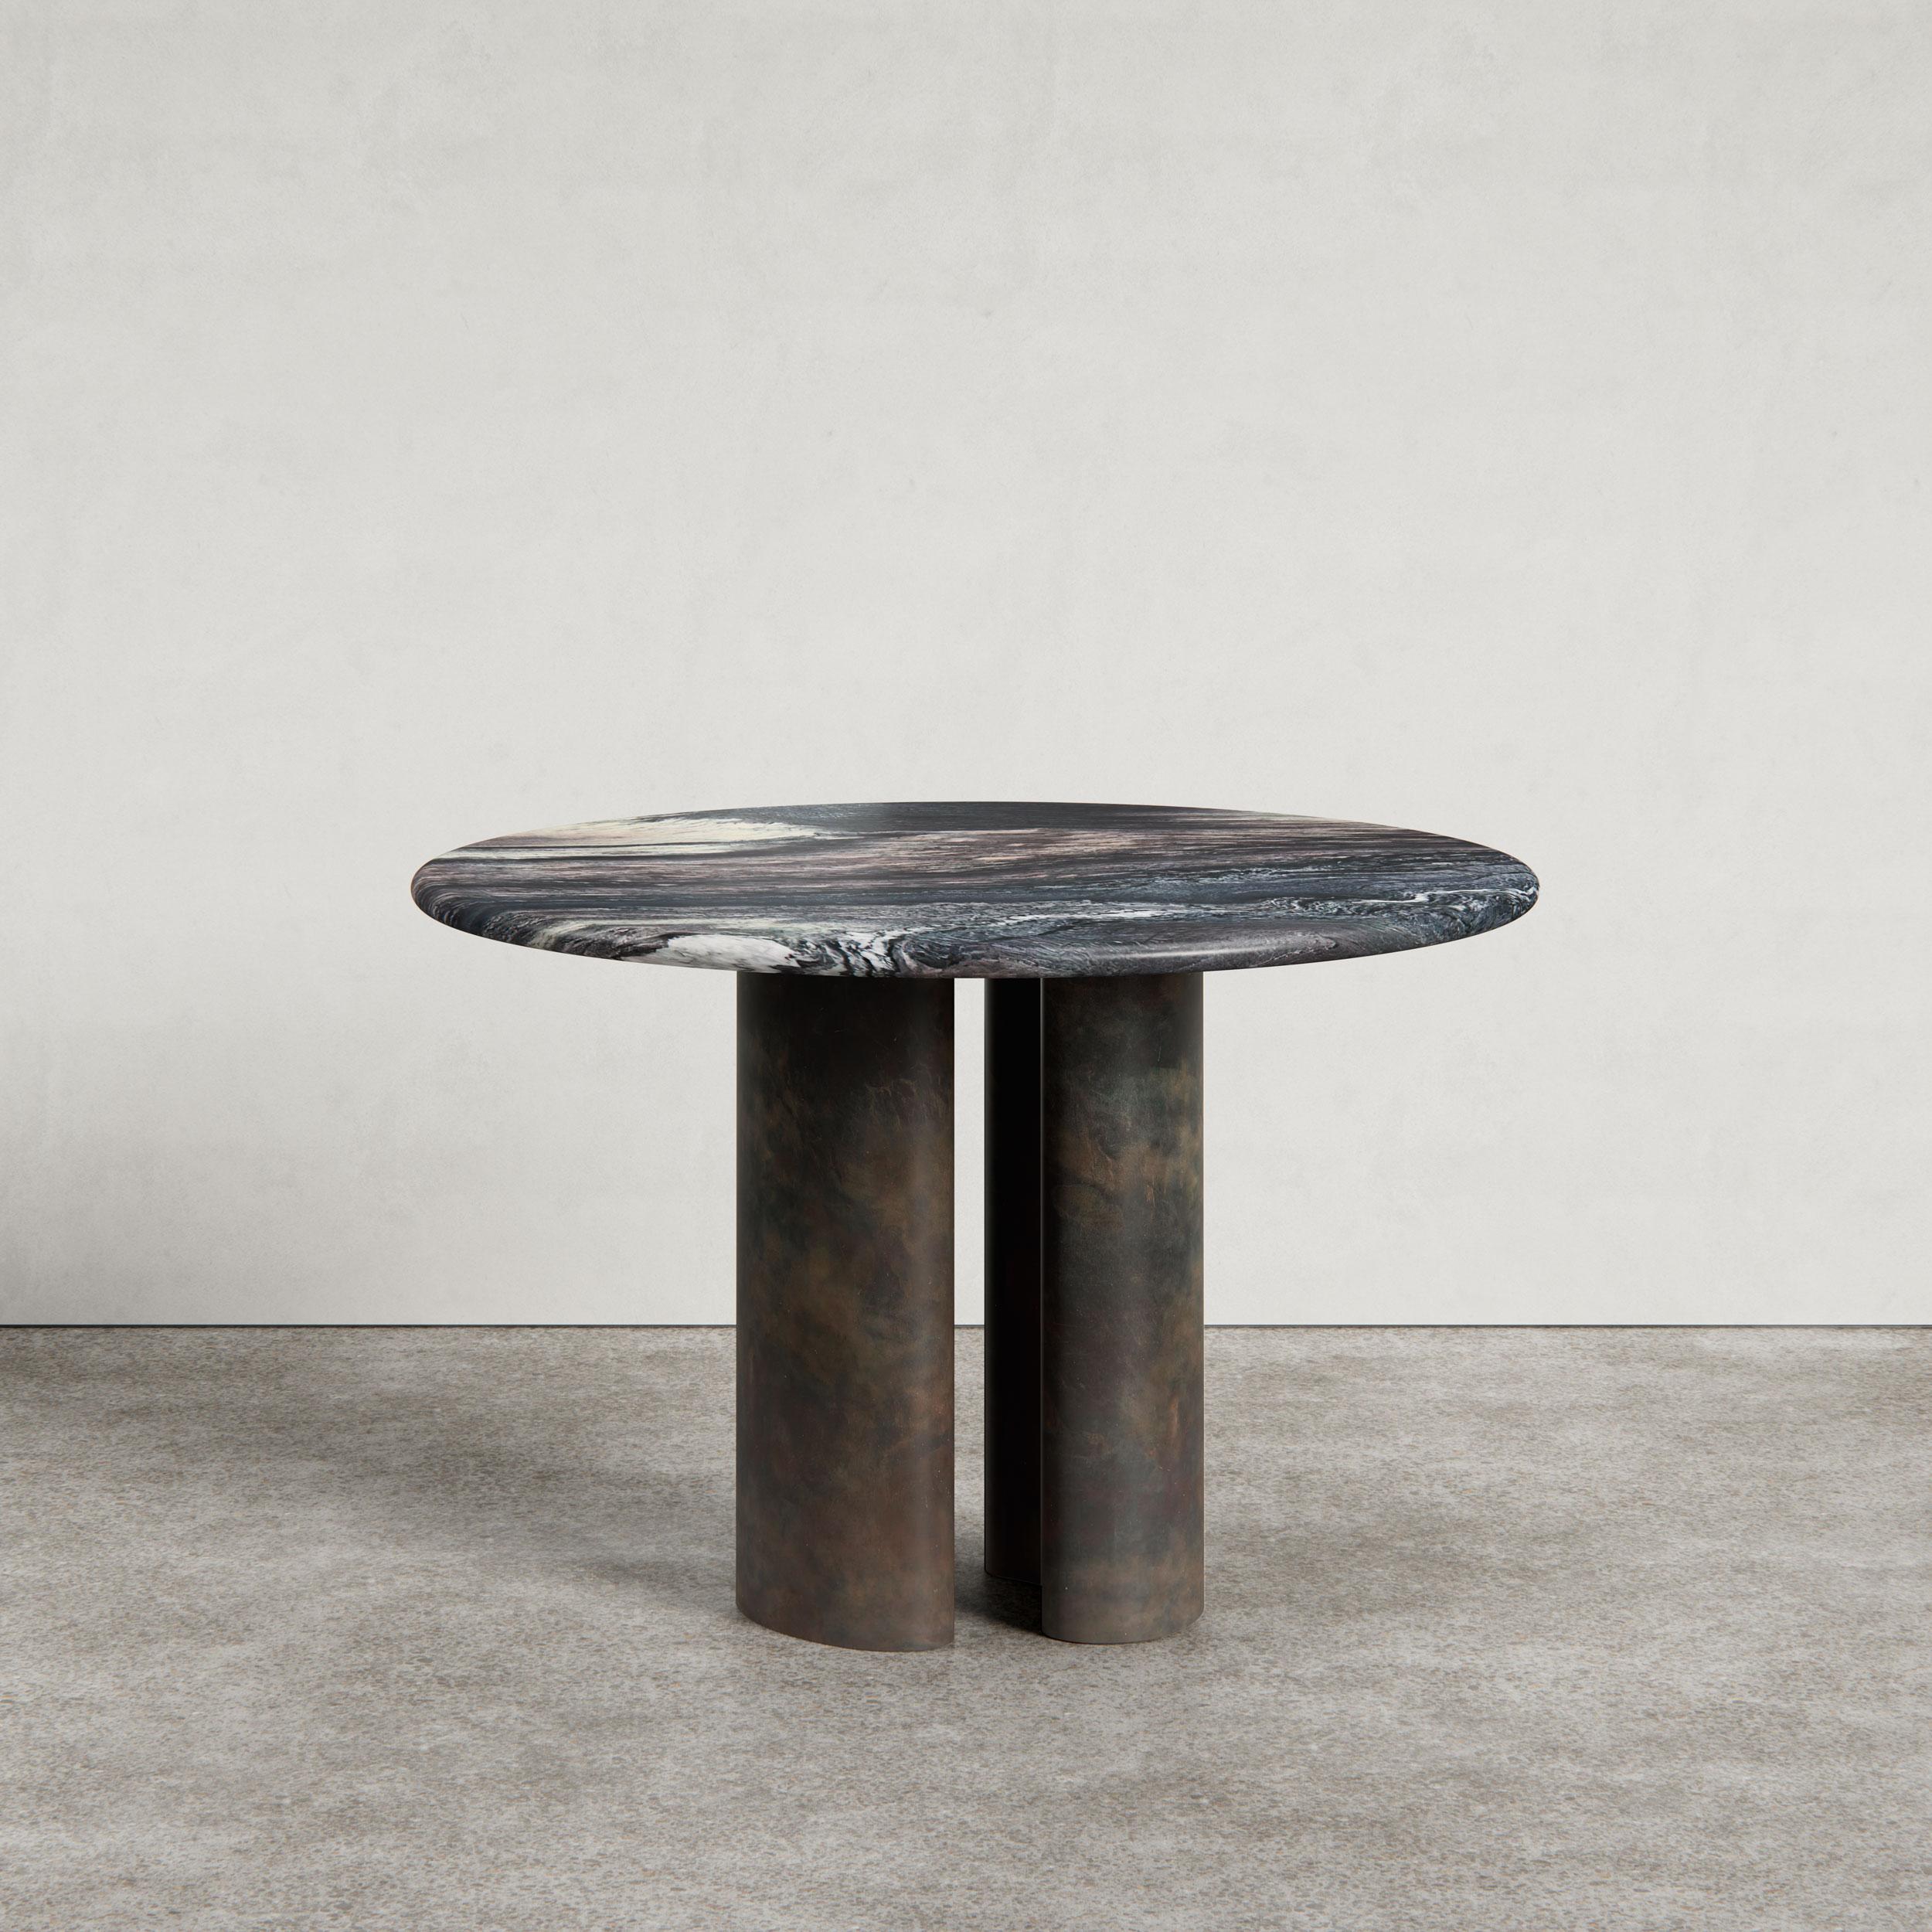 Introducing the Pietra Dining or feature table; a new addition to the Pietra collection. Designed by Just Adele. Handcrafted in Italian natural stone combined with steel in bronze patina finish.

Available in Cippolino, Viola Monet and Travertine.